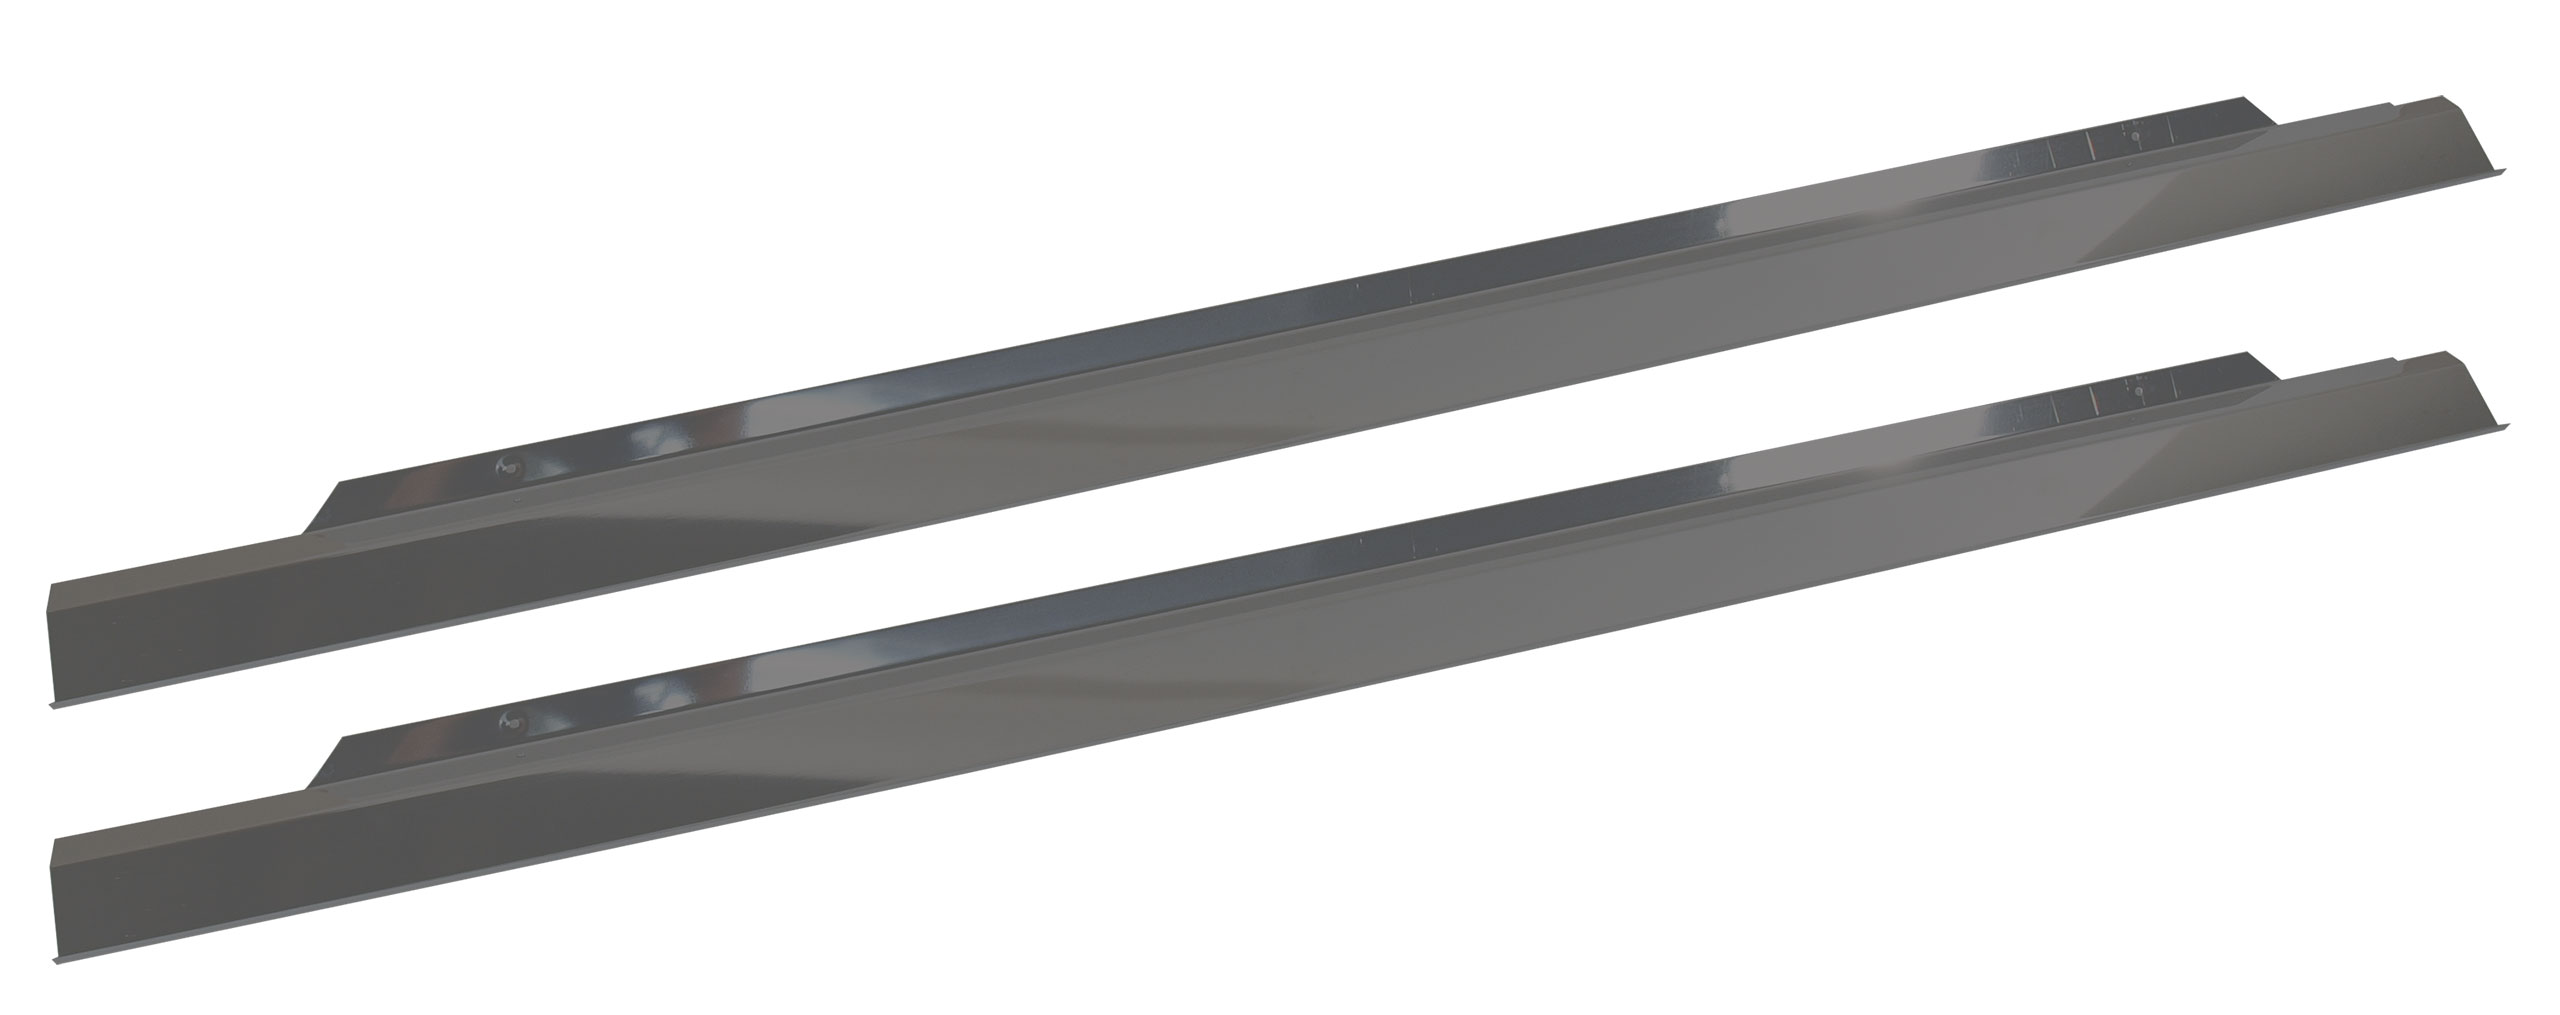 Accessory Sill Plates Dealer Option For 1969-1970 Mustang